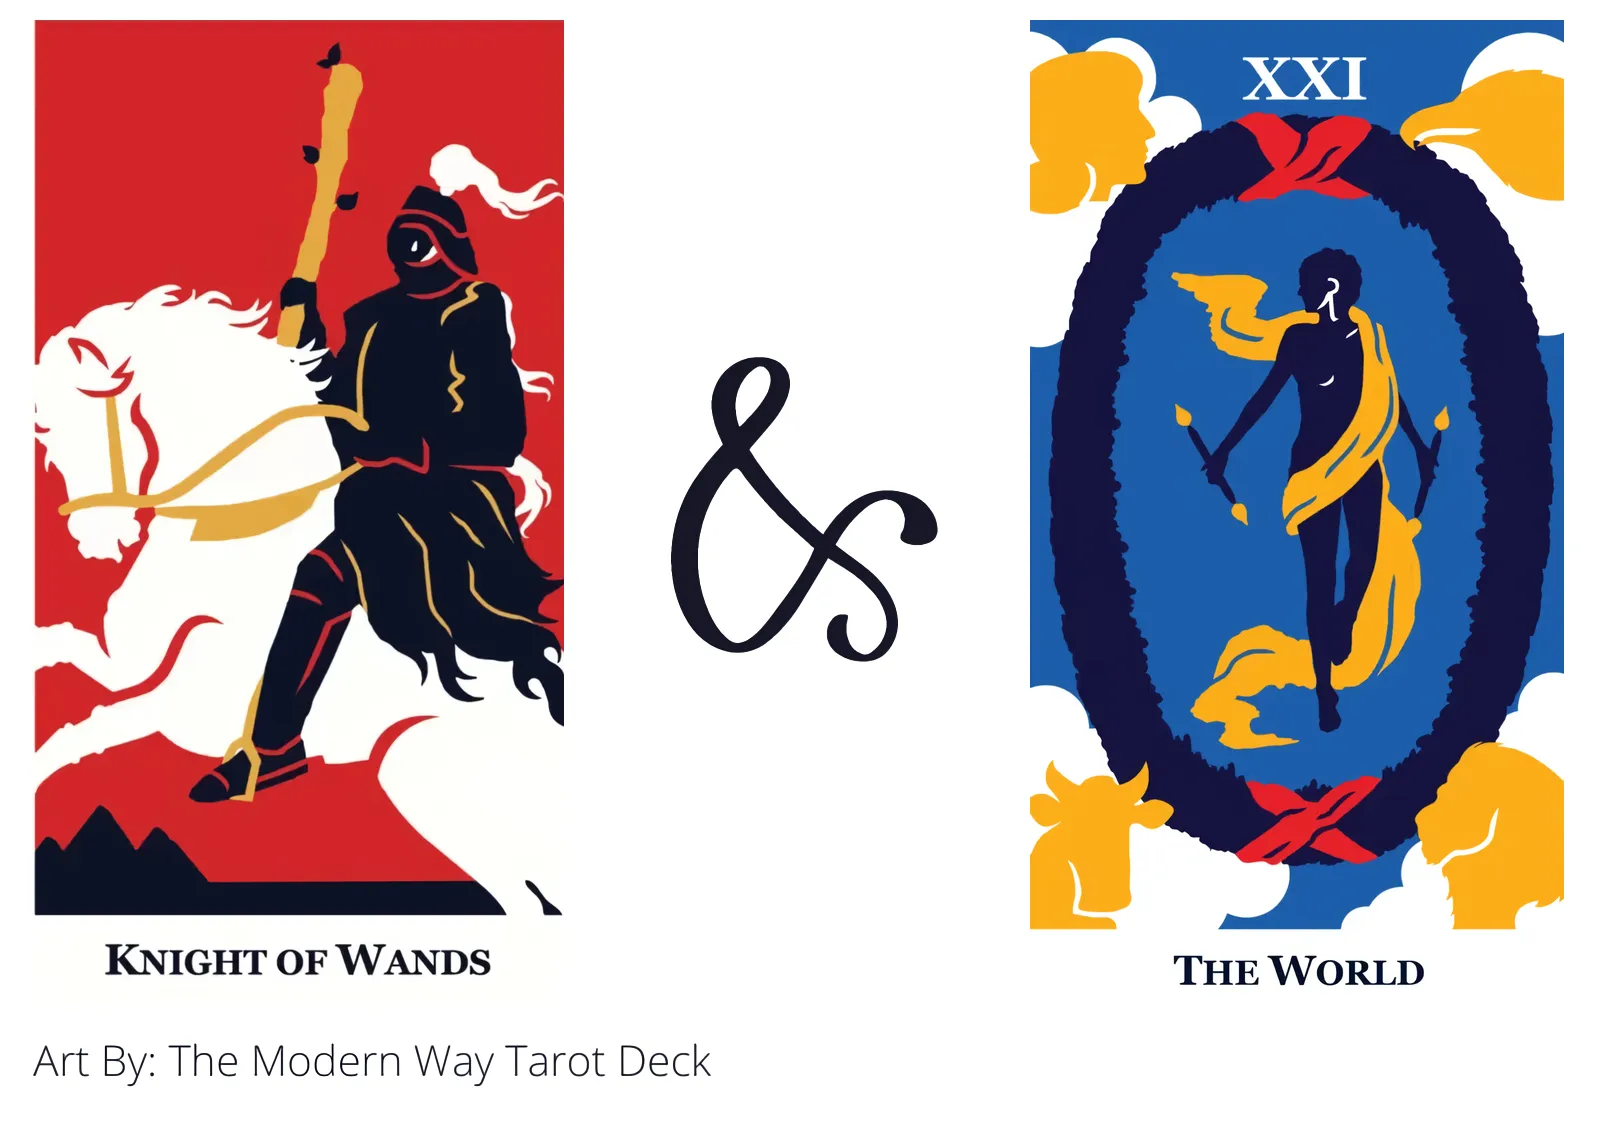 knight of wands and the world tarot cards together